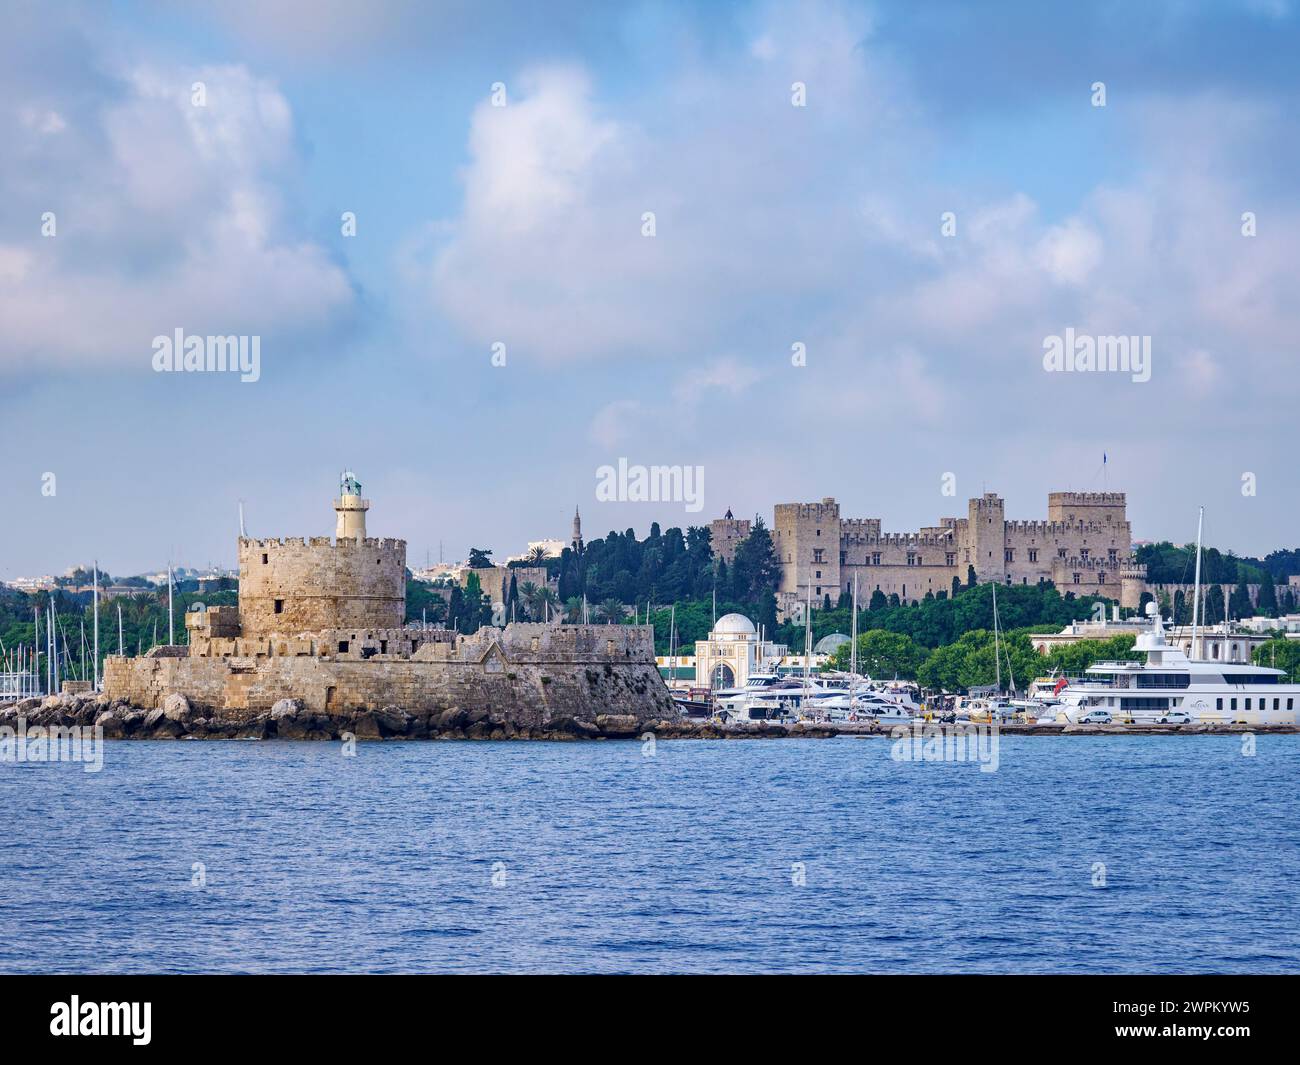 View towards the Saint Nicholas Fortress and Palace of the Grand Master of the Knights of Rhodes, UNESCO, Rhodes City, Rhodes Island, Dodecanese Stock Photo